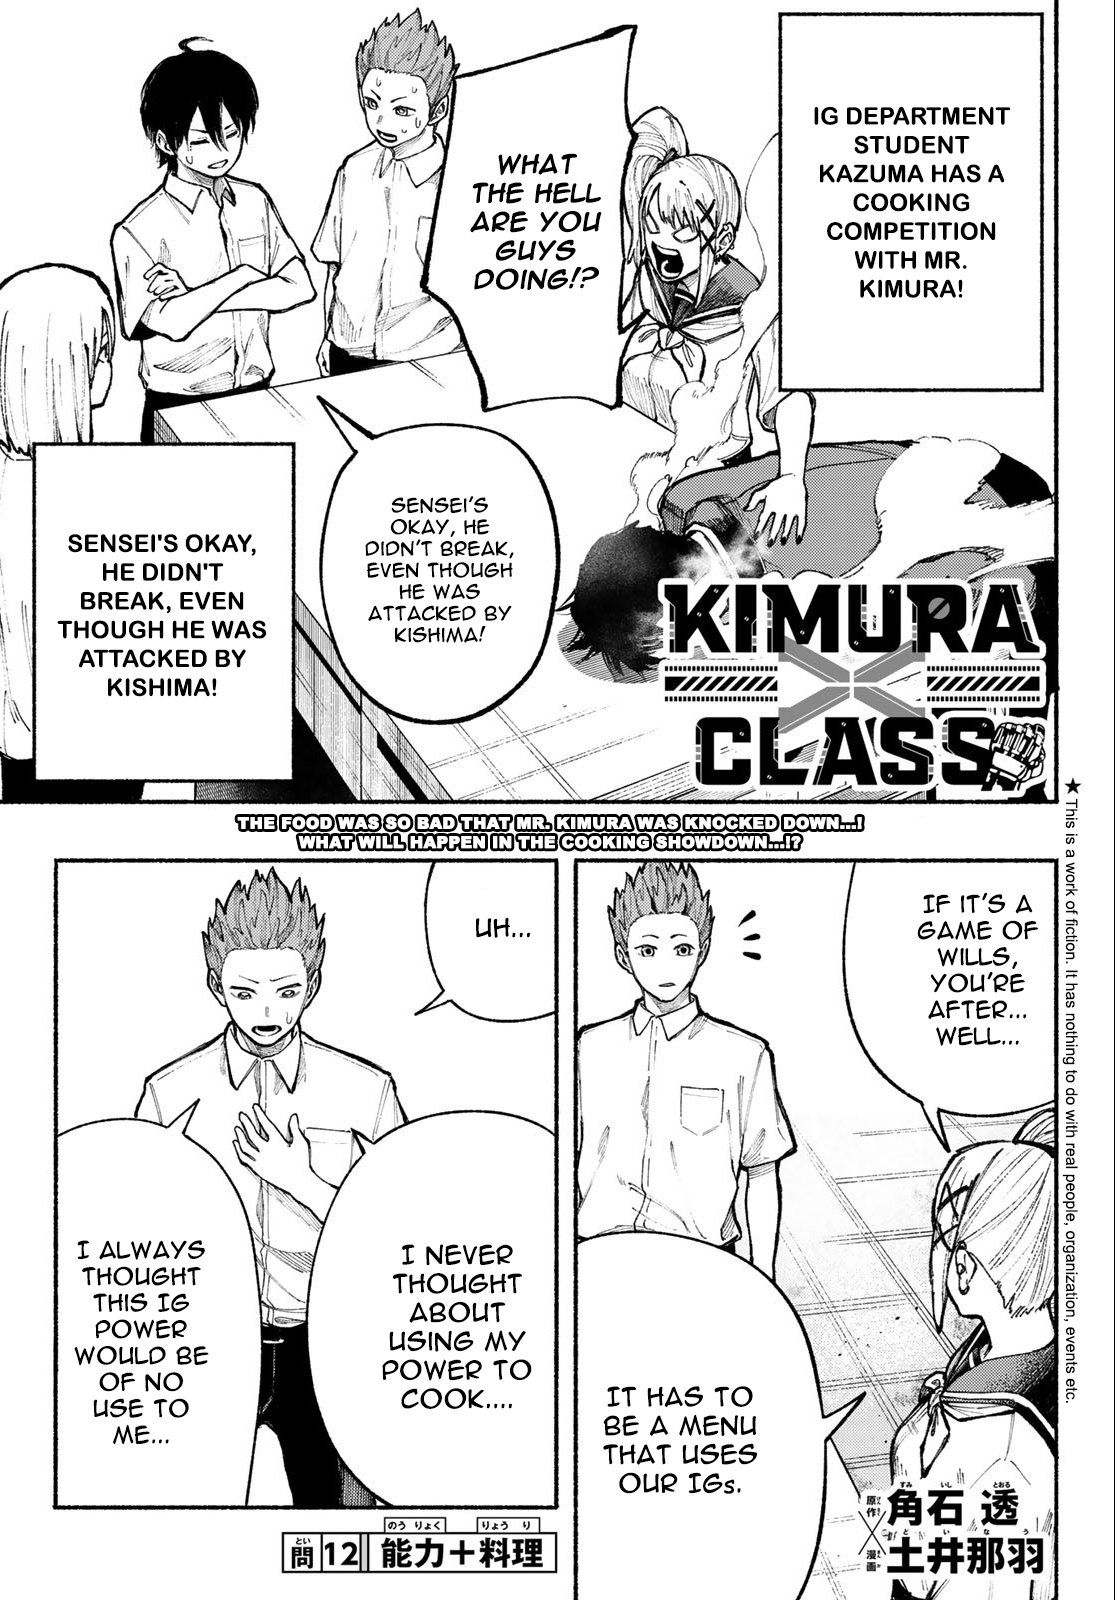 Kimura X Class Vol.1 Chapter 12: Ability + Cooking - Picture 2